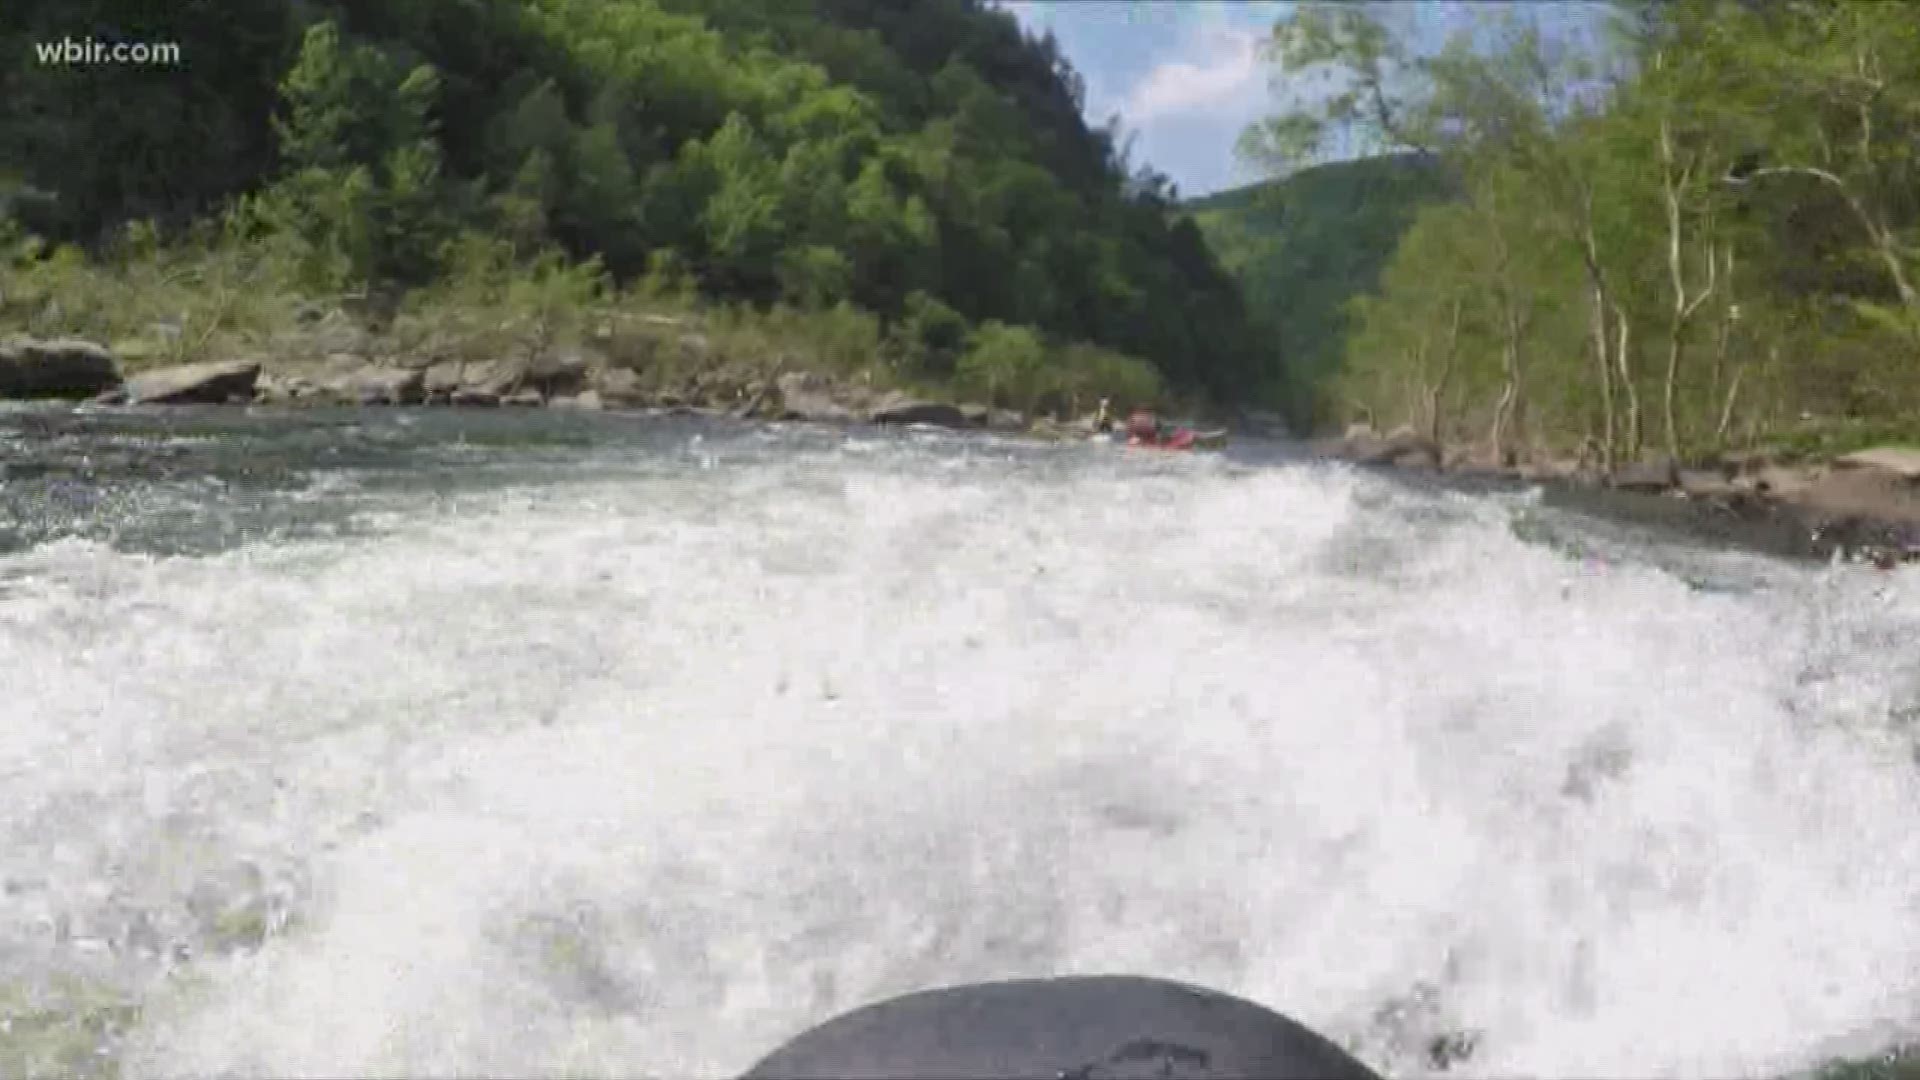 The Obed Wild & Scenic River offers an adventurous escape just one hour from Knoxville.